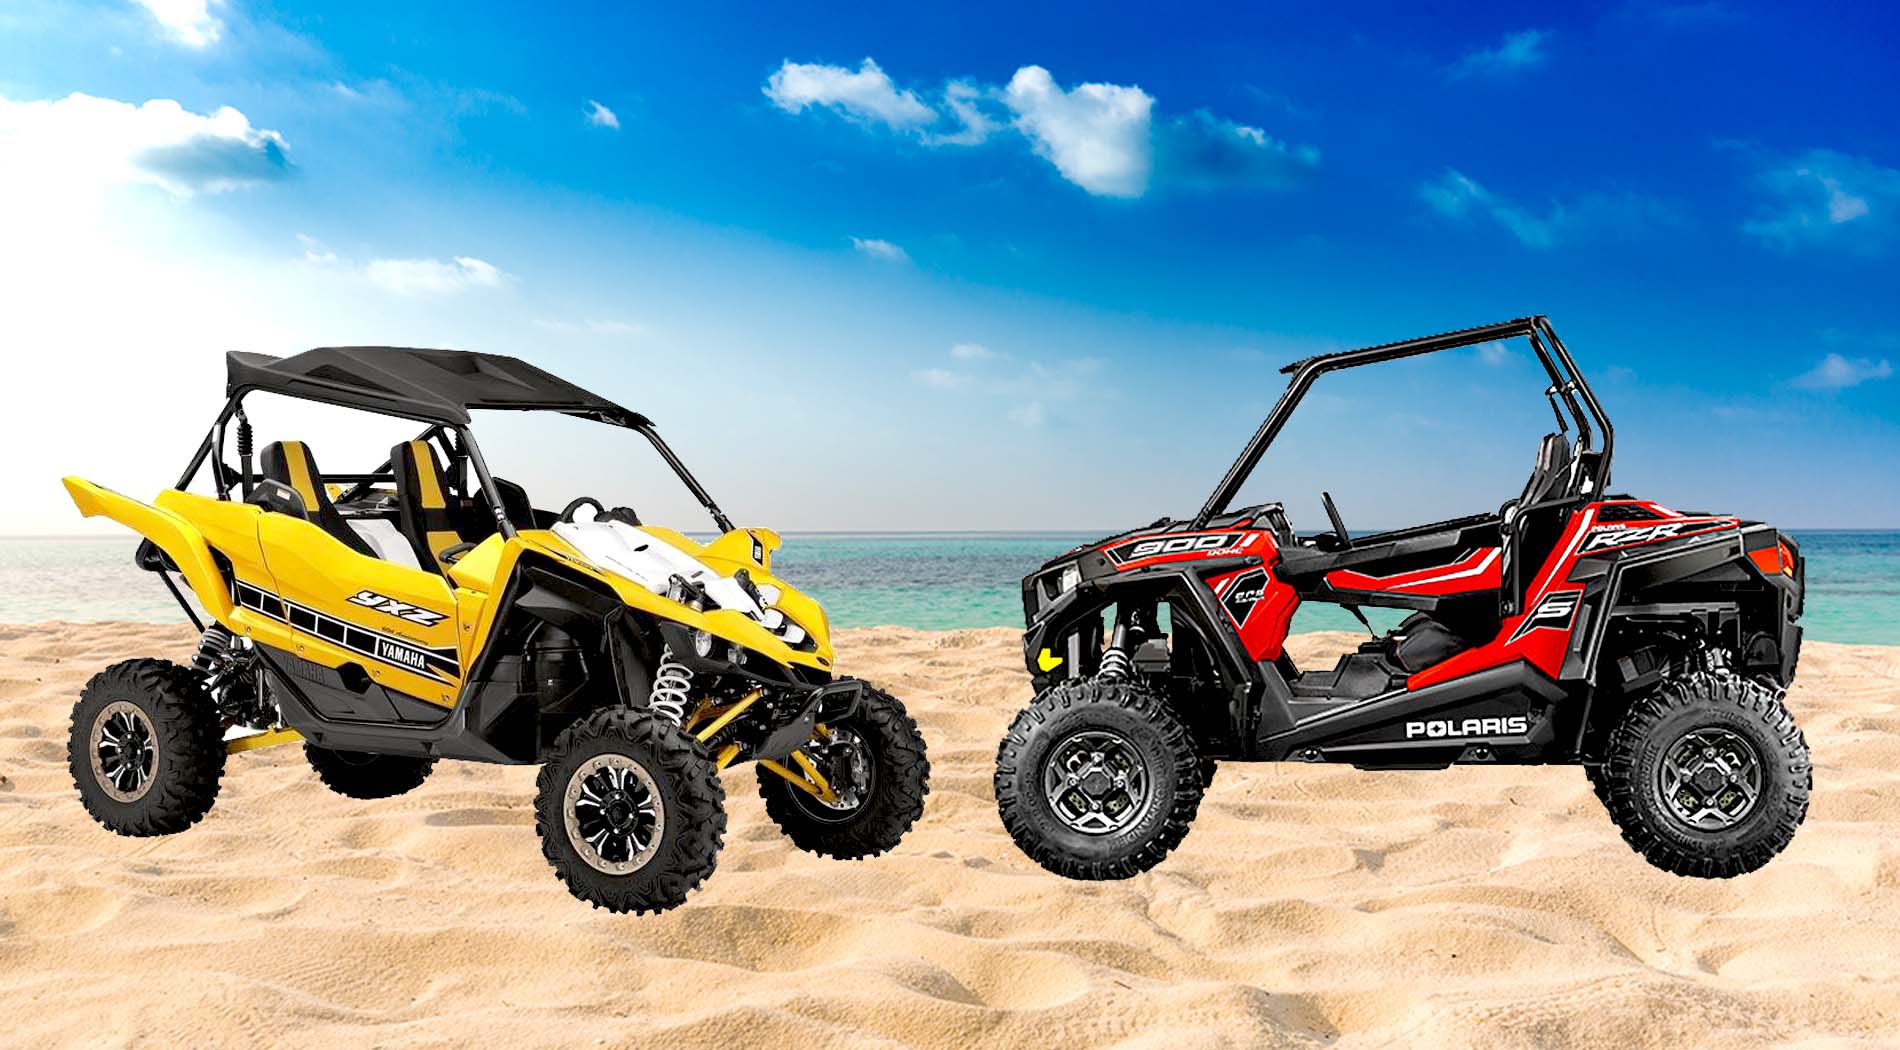 Polaris vs Yamaha side-by-side which is better?